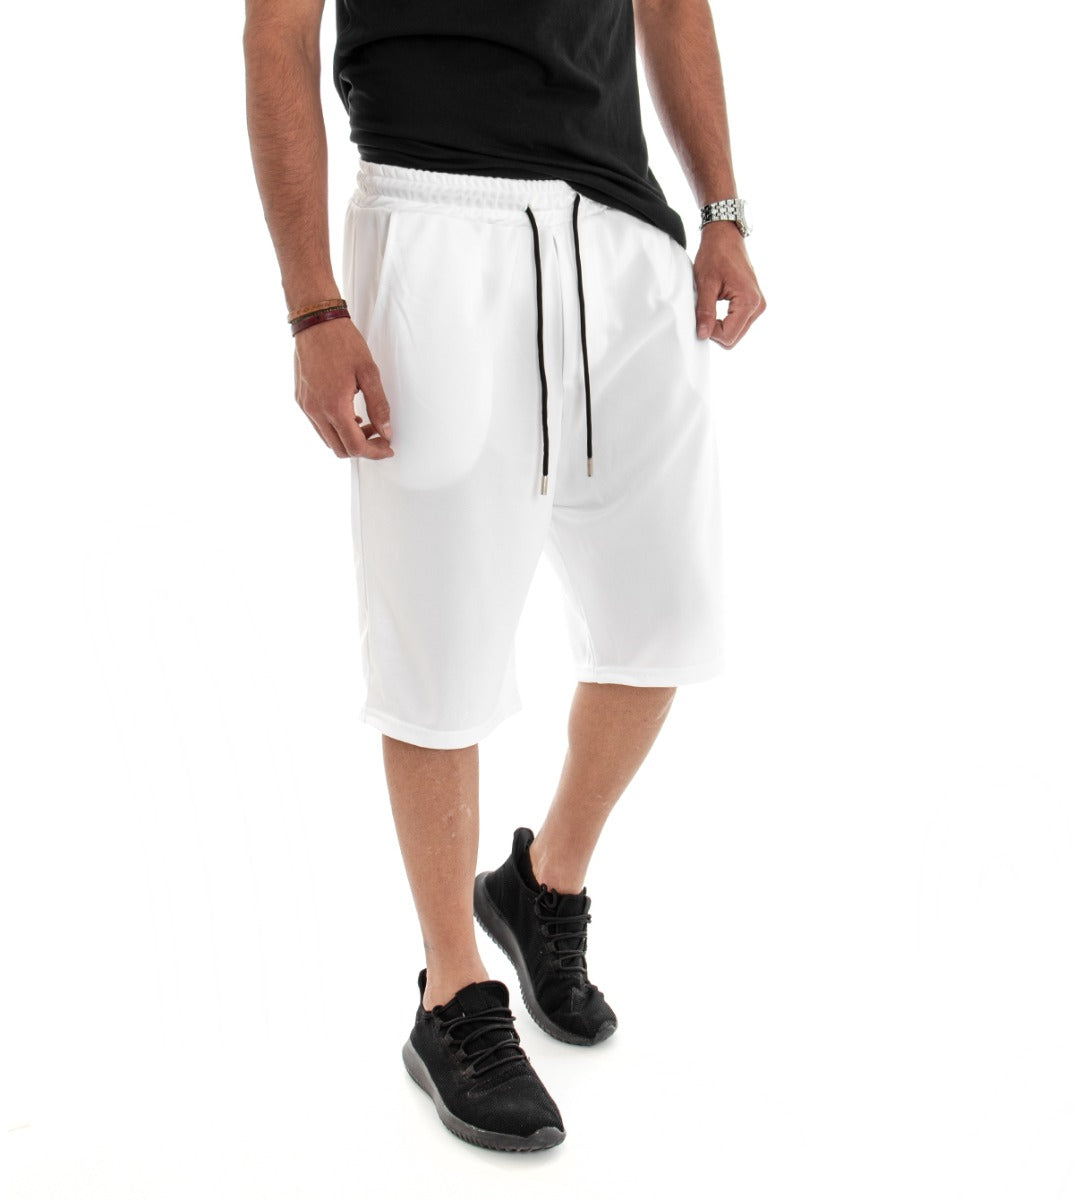 Bermuda Shorts Men's Tracksuit Over Solid Color White GIOSAL-PC1475A